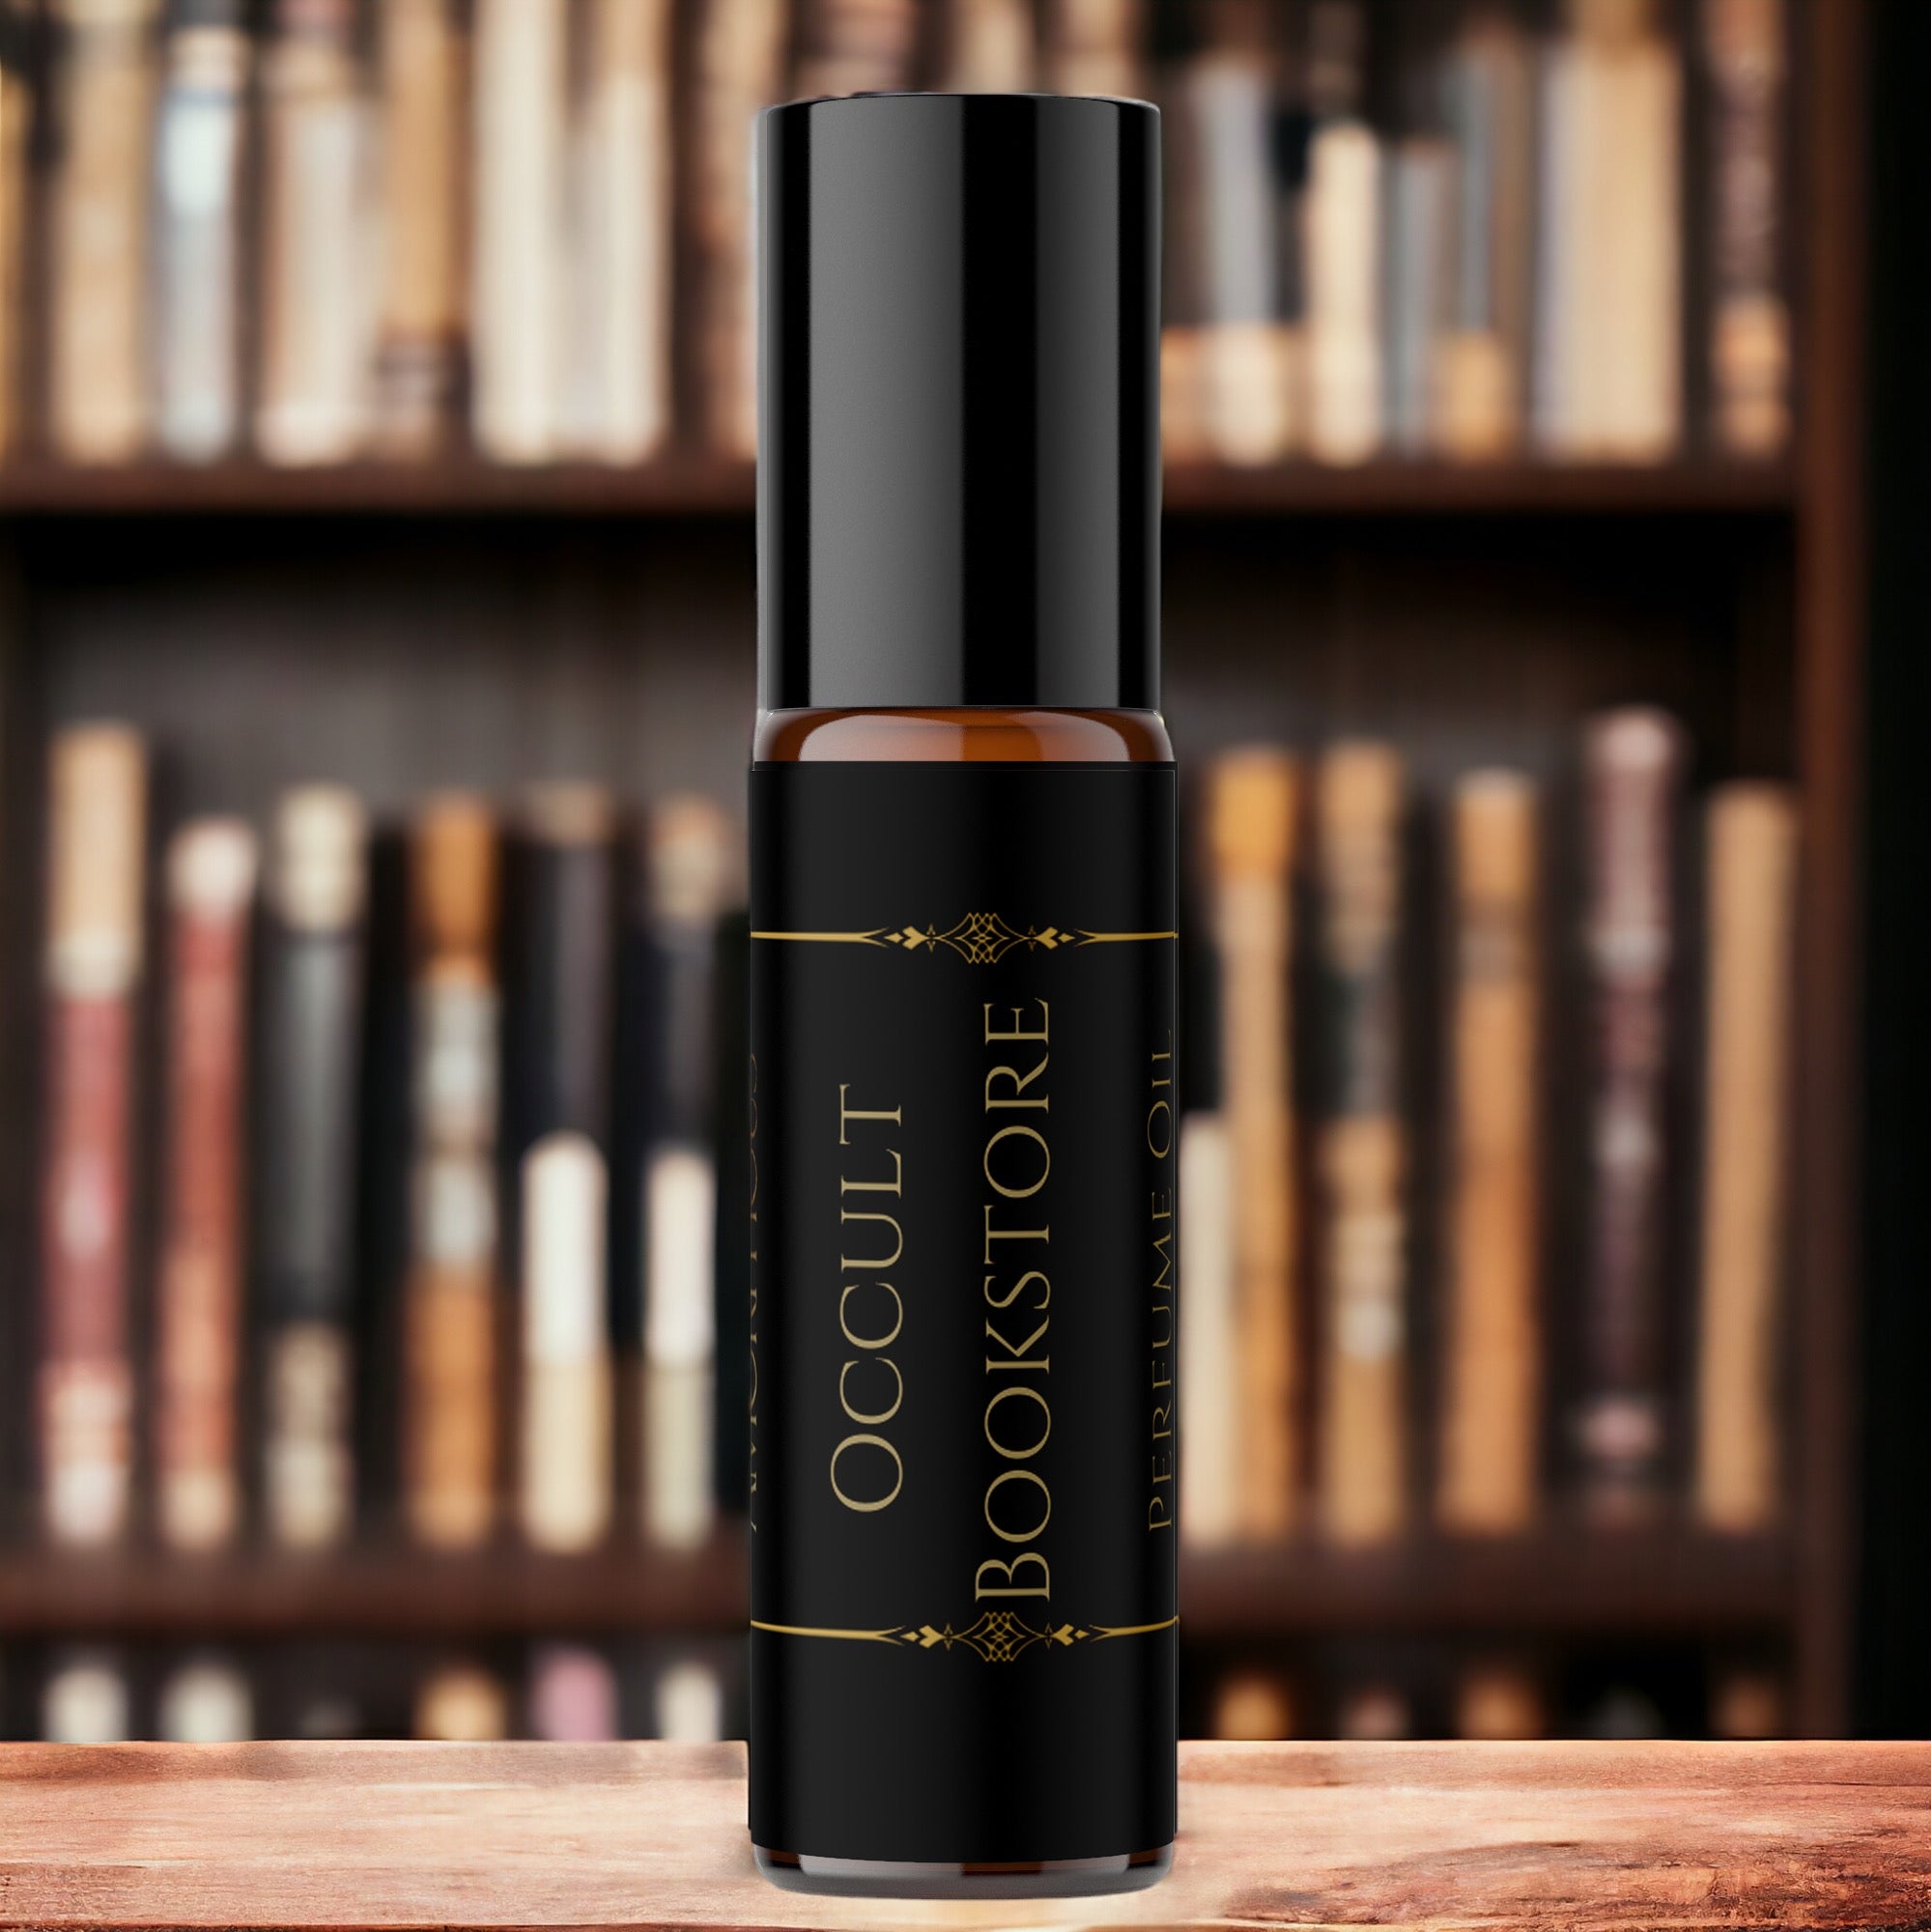 occult bookstore rollerball perfume